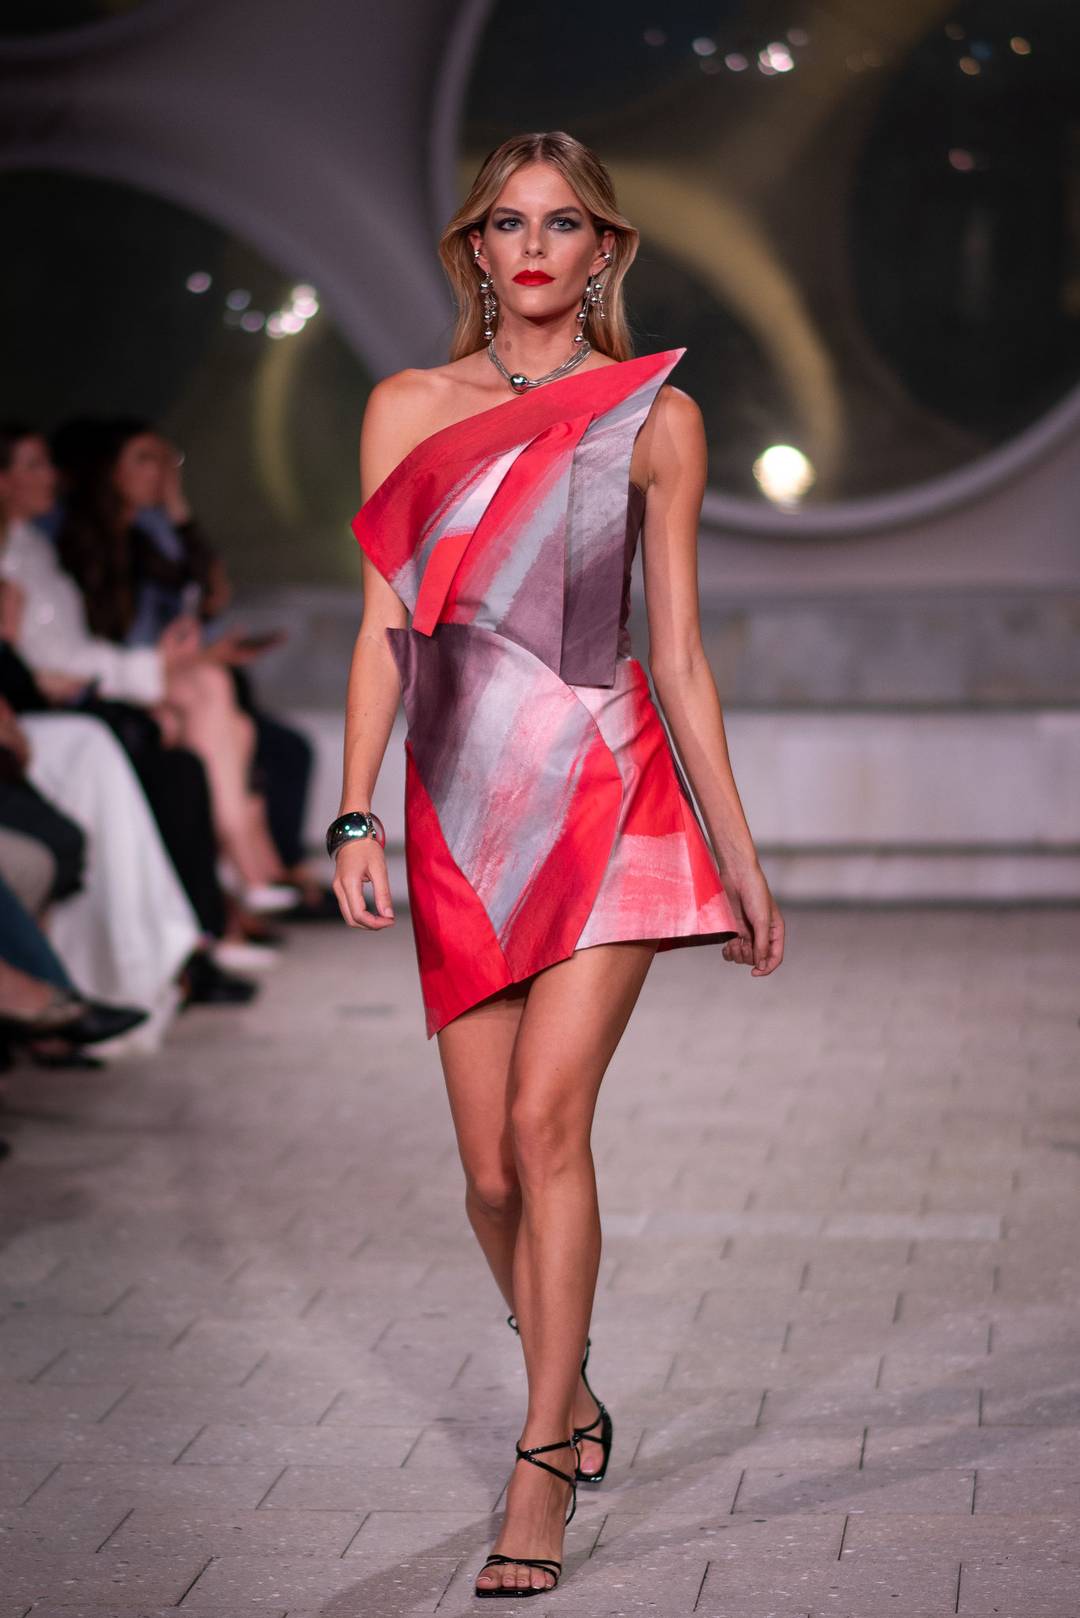 A look by Daniel Uribe at the Istituto Marangoni inaugural student fashion show, May 2024.